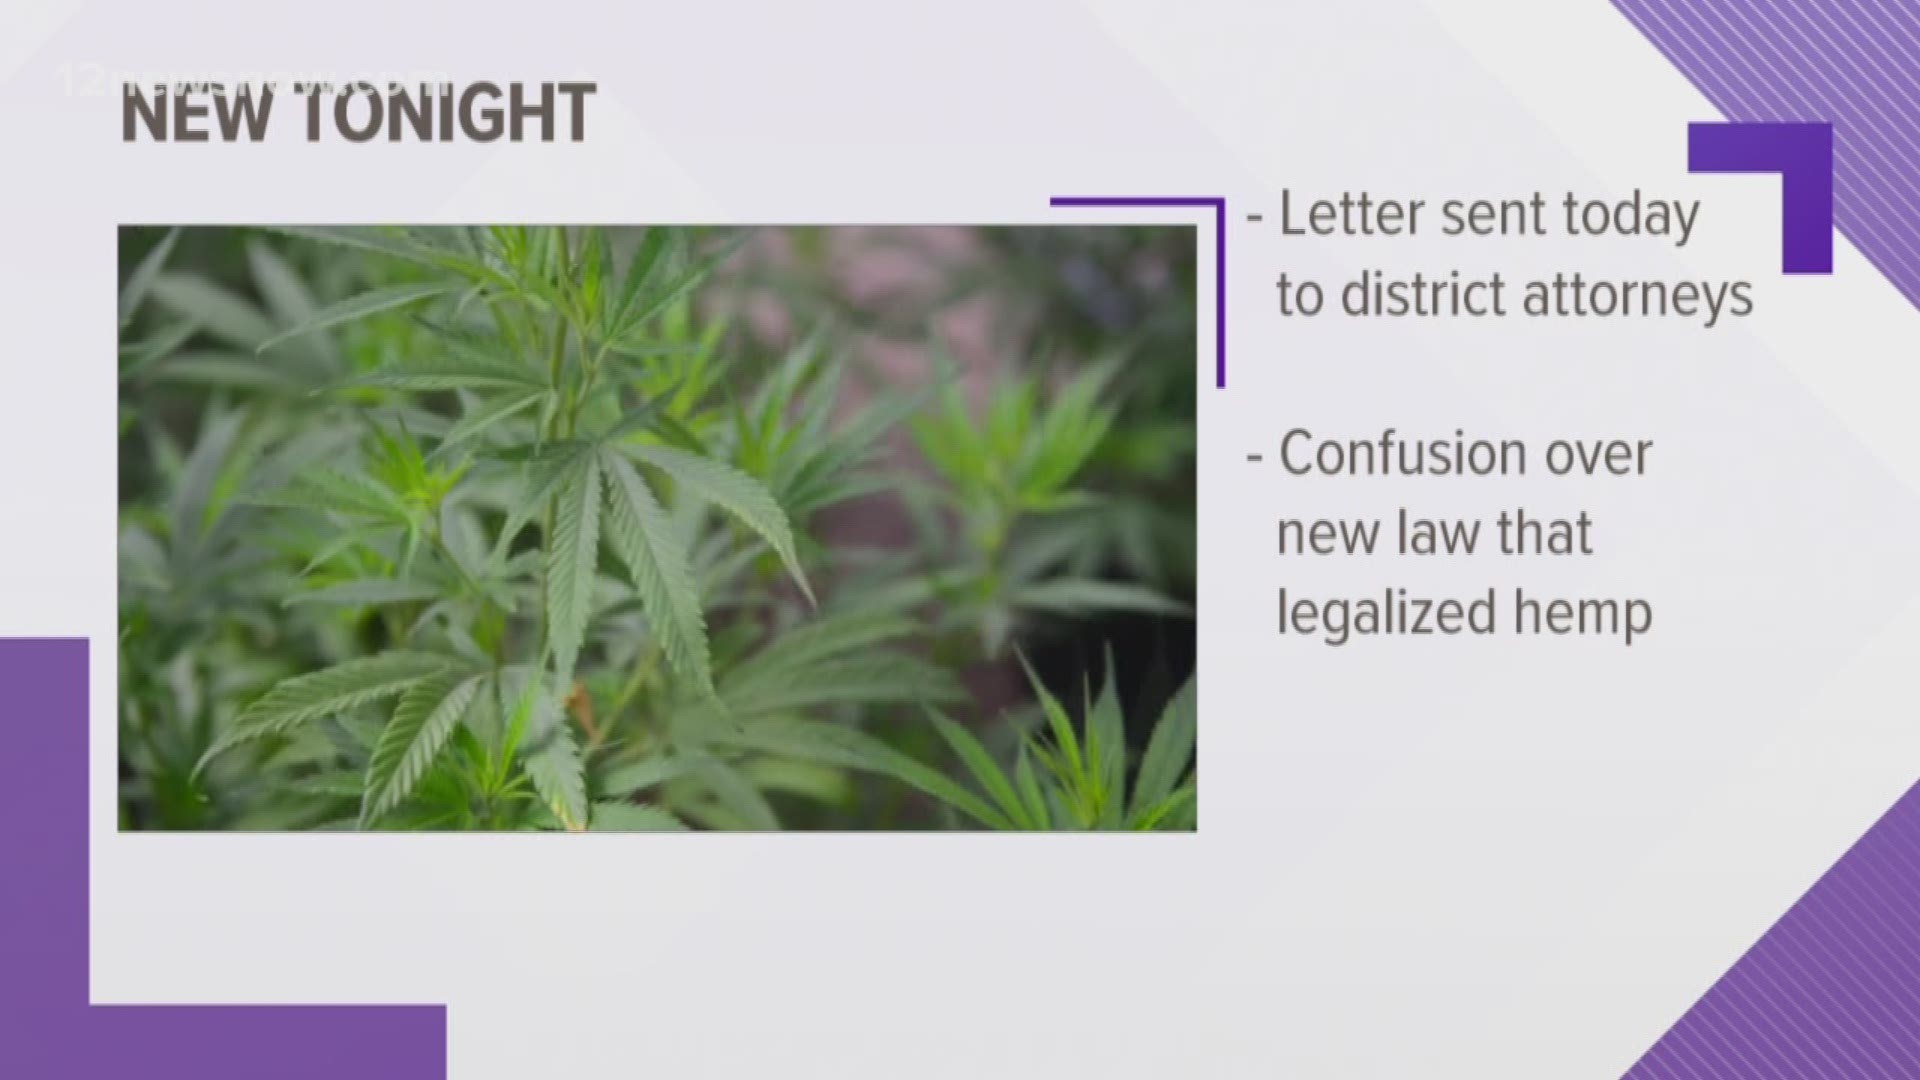 The law has caused some confusion about marijuana possession in Texas.